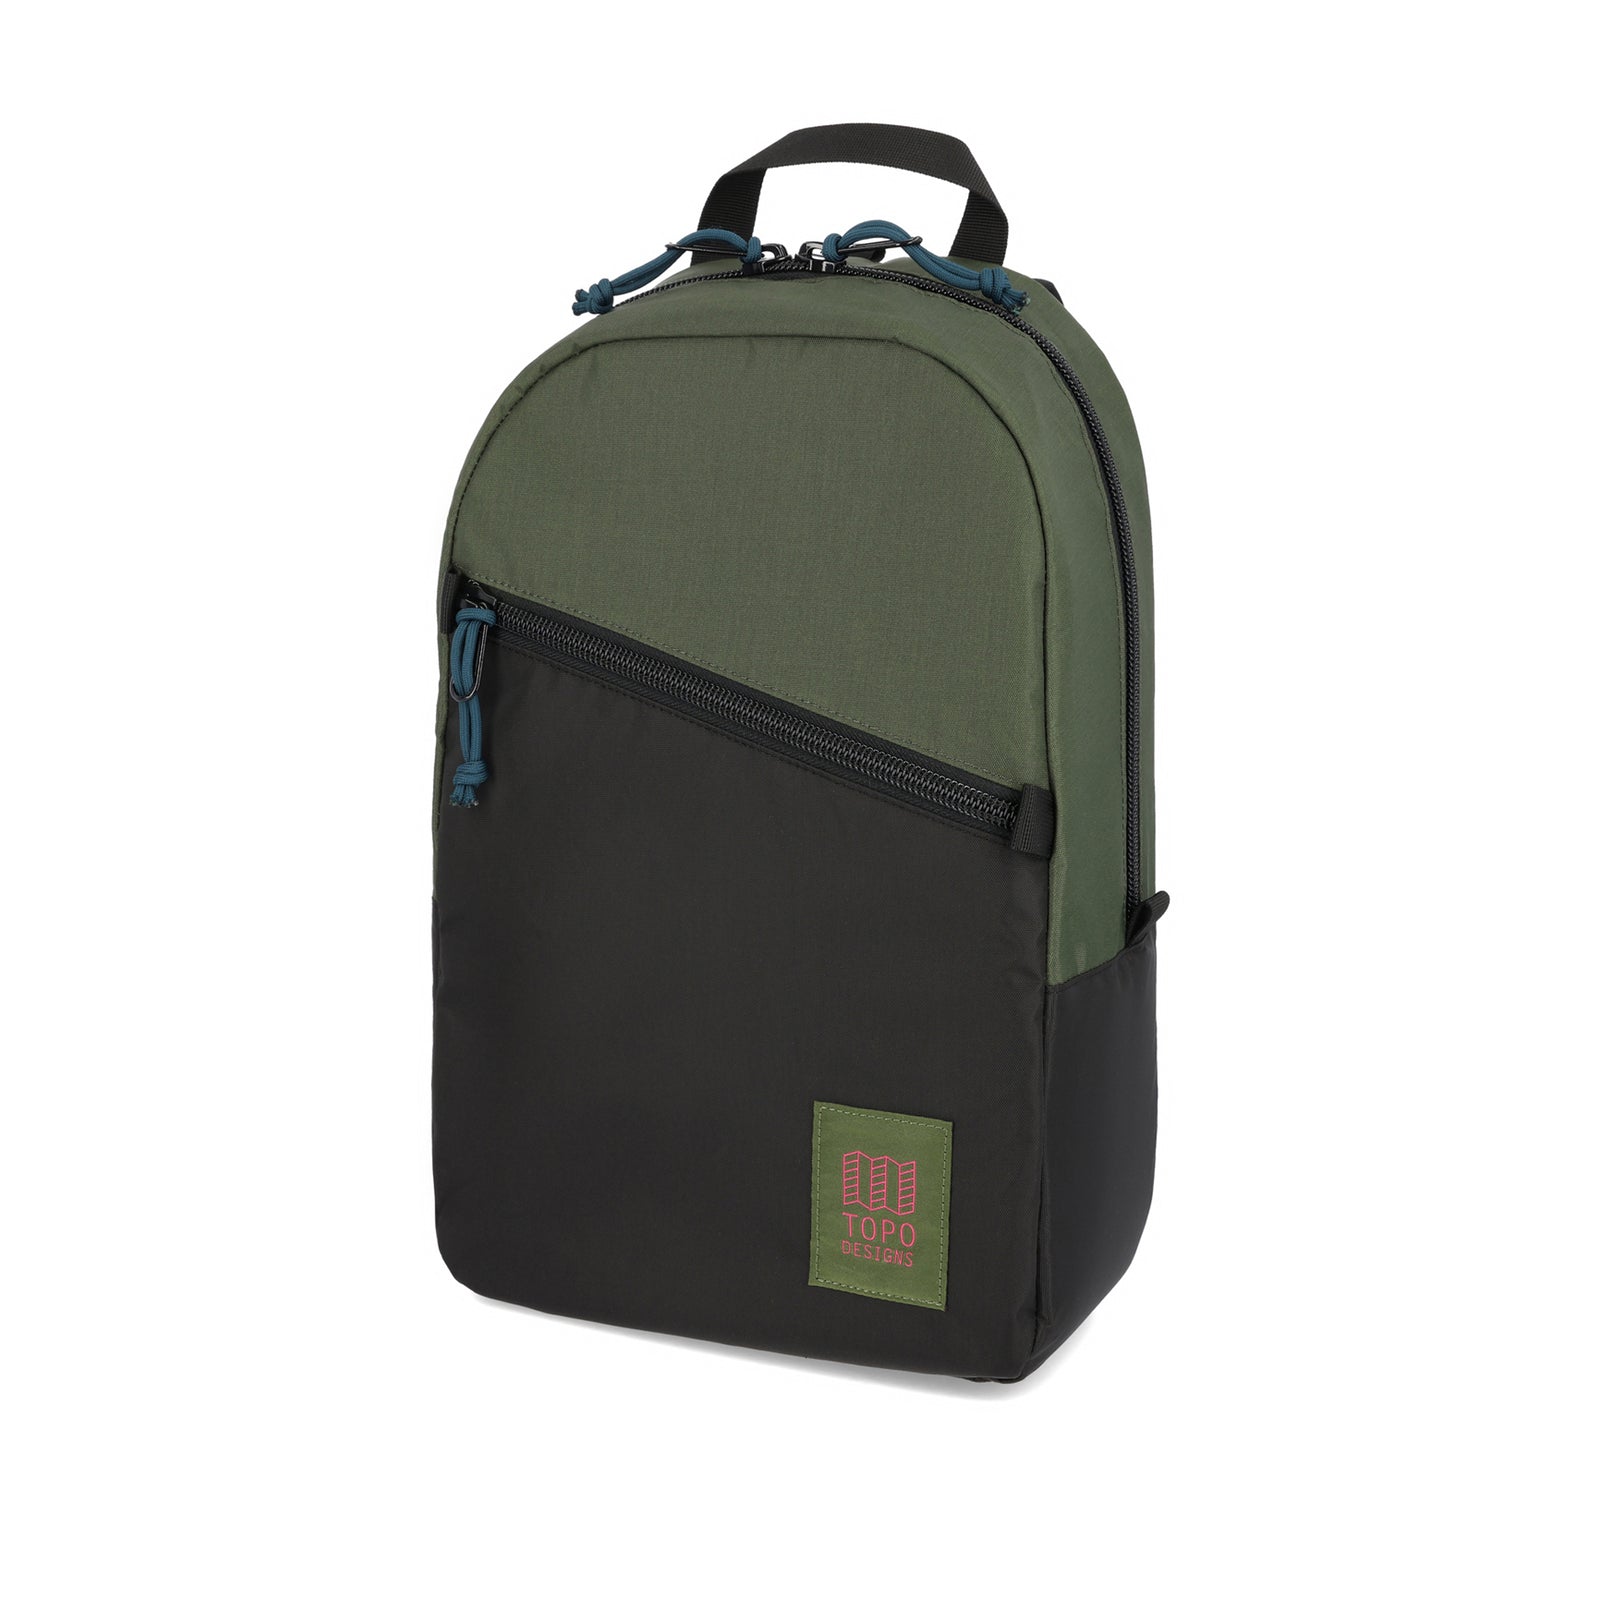 Topo Designs Light Pack laptop backpack in "Olive / Black - Recycled" green.